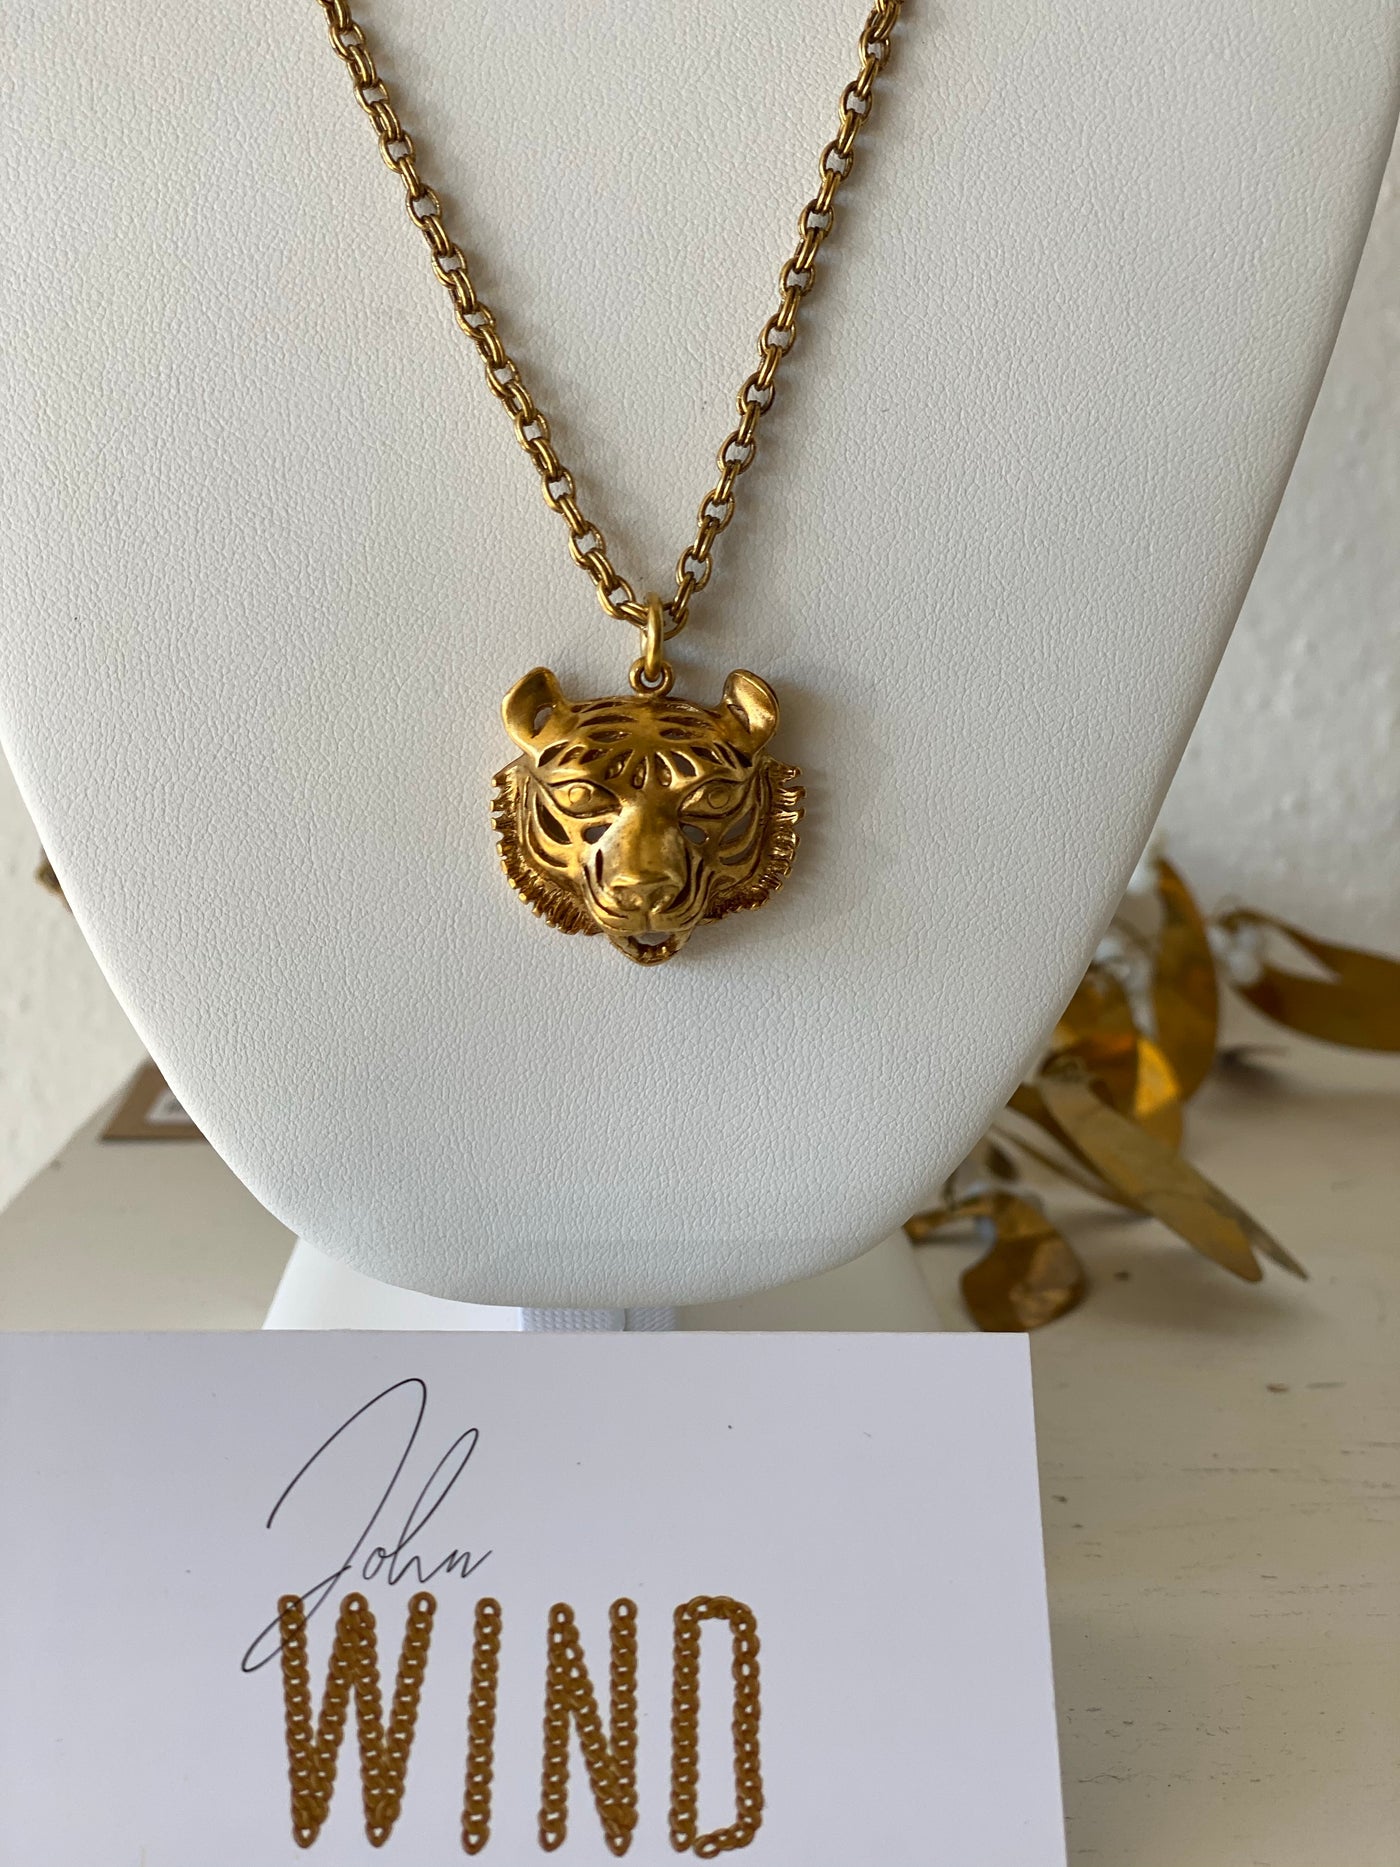 YIN-YANG TIGER NECKLACE IN GOLD & SILVER – Untold-truth-ecom